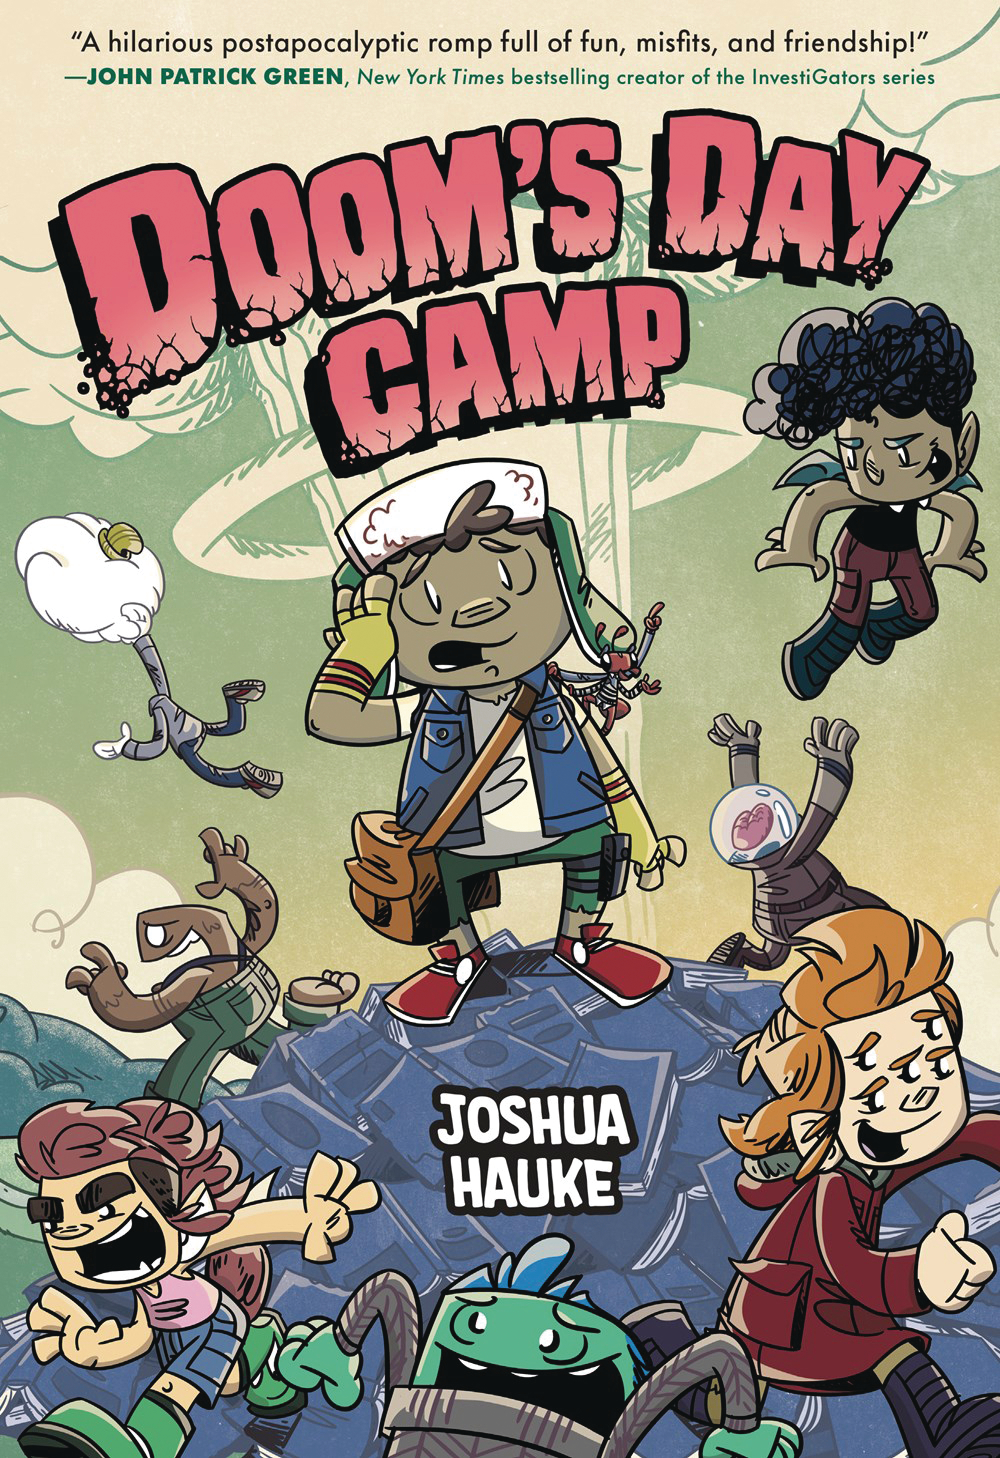 Dooms Day Camp Hardcover Graphic Novel